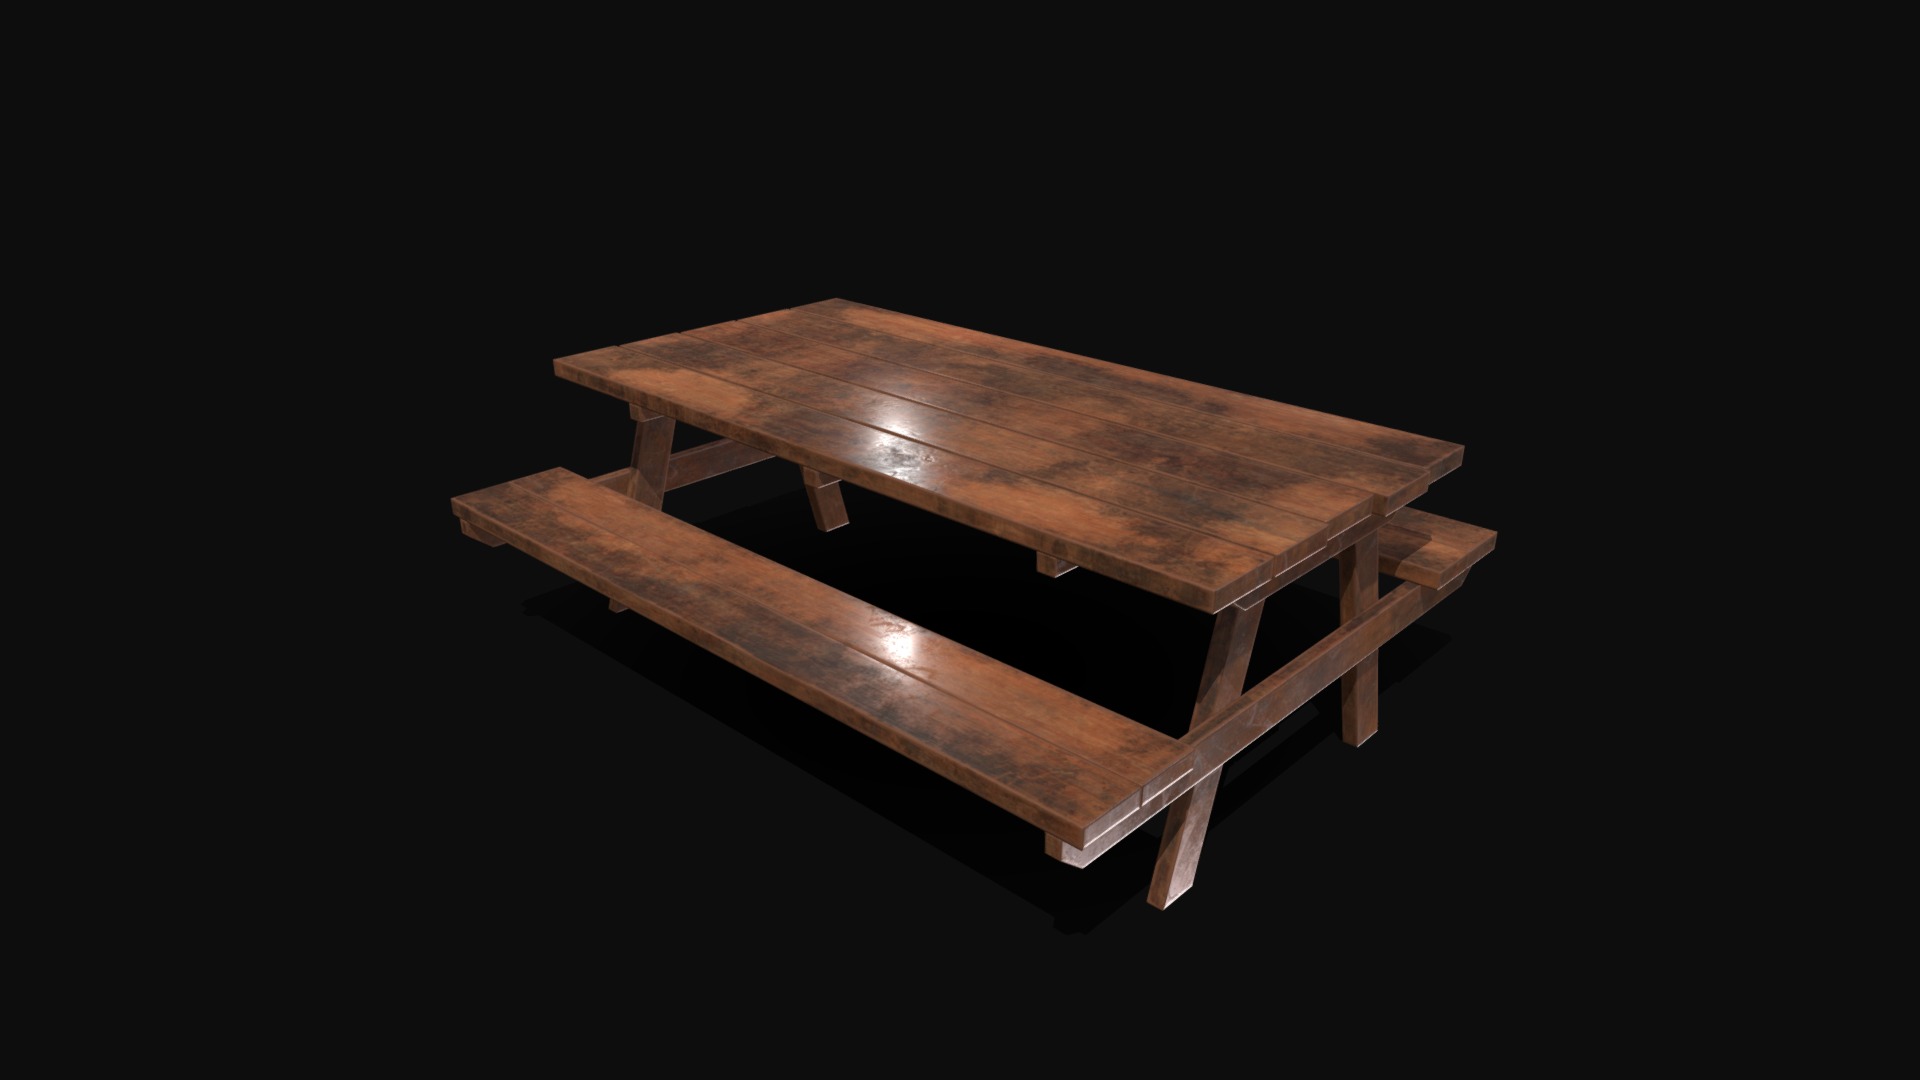 3D model tablebench - This is a 3D model of the tablebench. The 3D model is about a wooden table with a dark background.